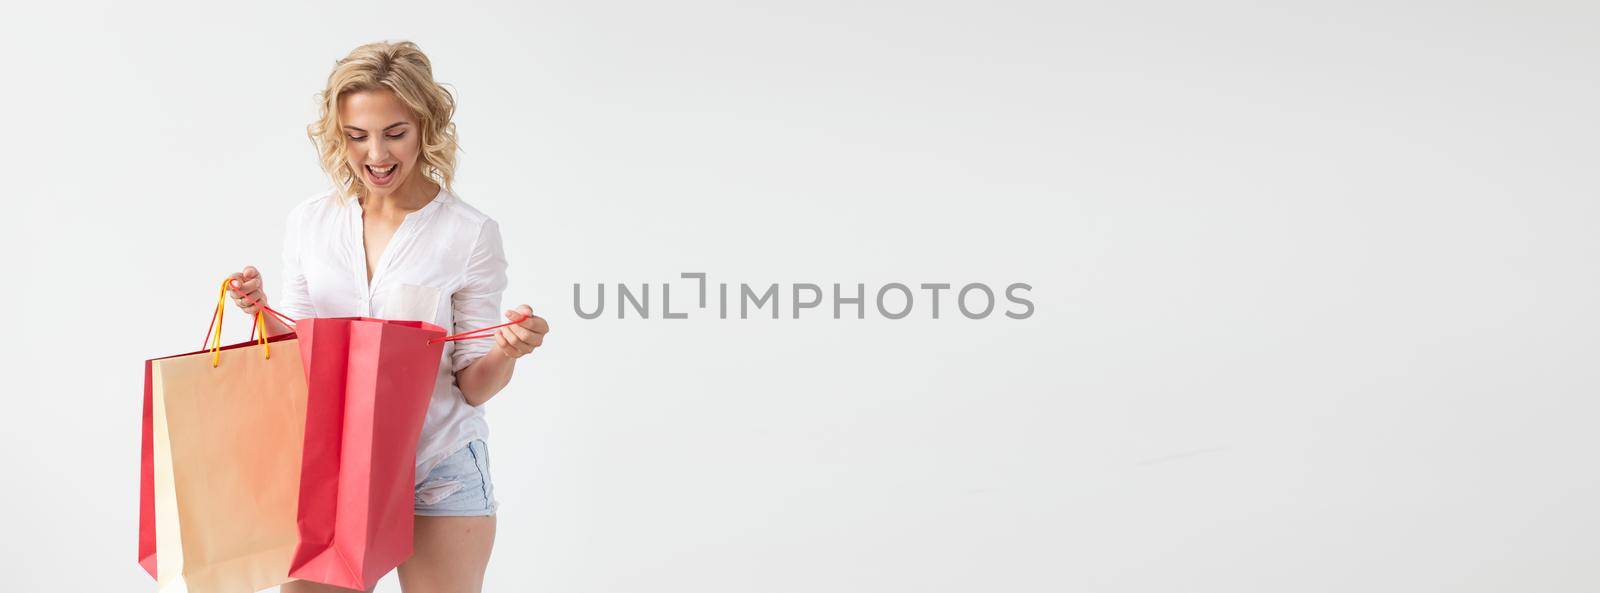 Charming young joyful blonde woman holds in her hands bags with a new clothing posing on a white background banner with copy space and place for advertising. Shopping concept. by Satura86